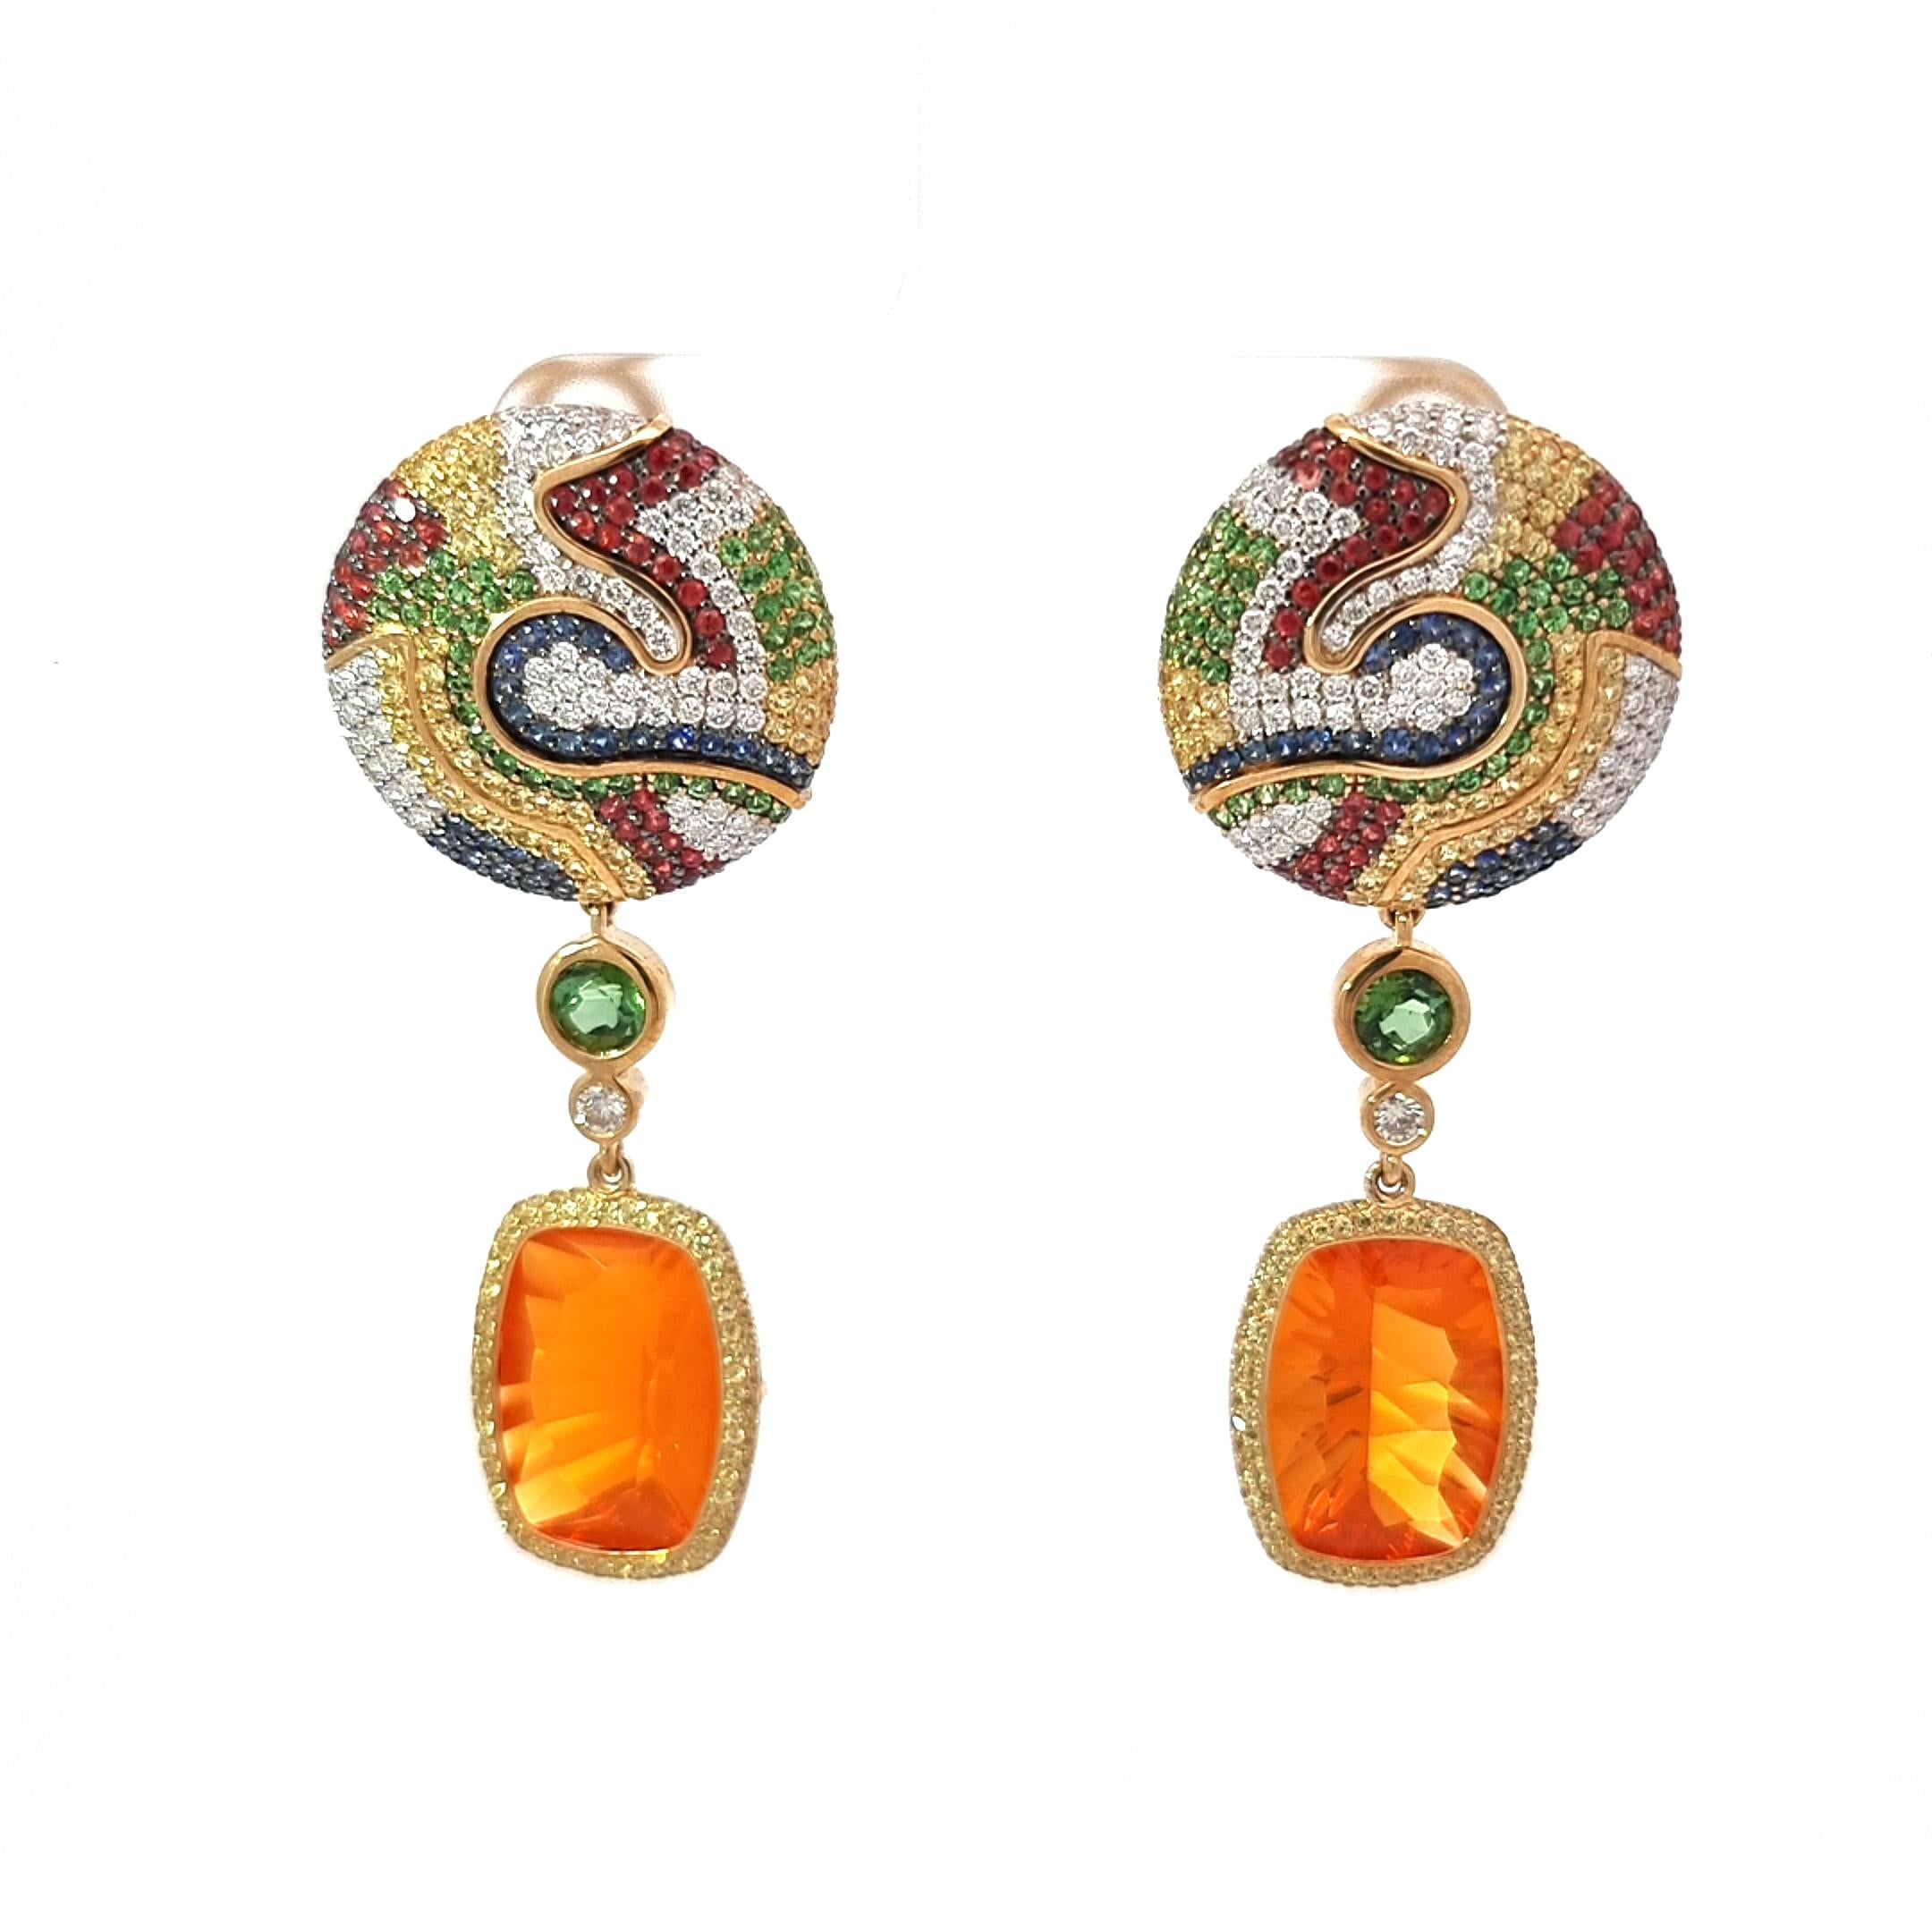 Africa collection by VOTIVE.

Mexican Fire Opals, Tourmalines, Tsavorites, Blue, Red and Yellow Sapphires, White Diamonds, 18k Yellow Gold.

Blending into vivid shades of reds, yellows, and oranges, Safari Sunrise earrings match the breathtaking